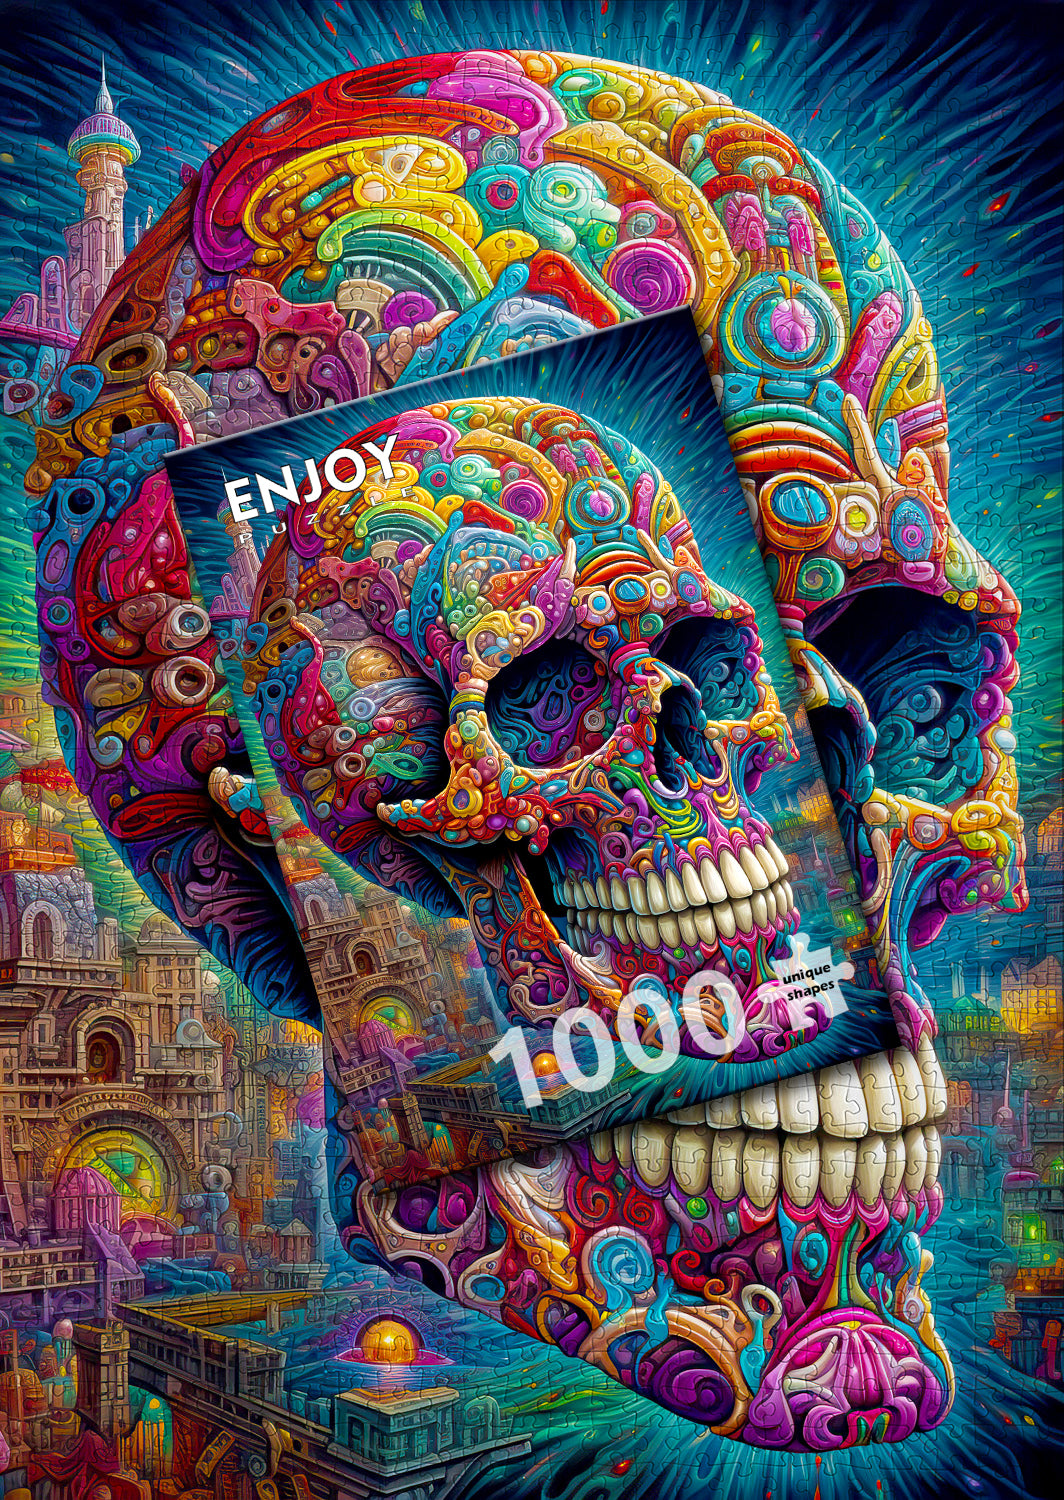 1000 Pieces Jigsaw Puzzle - Quirky Skull (2210) – ENJOY Puzzle